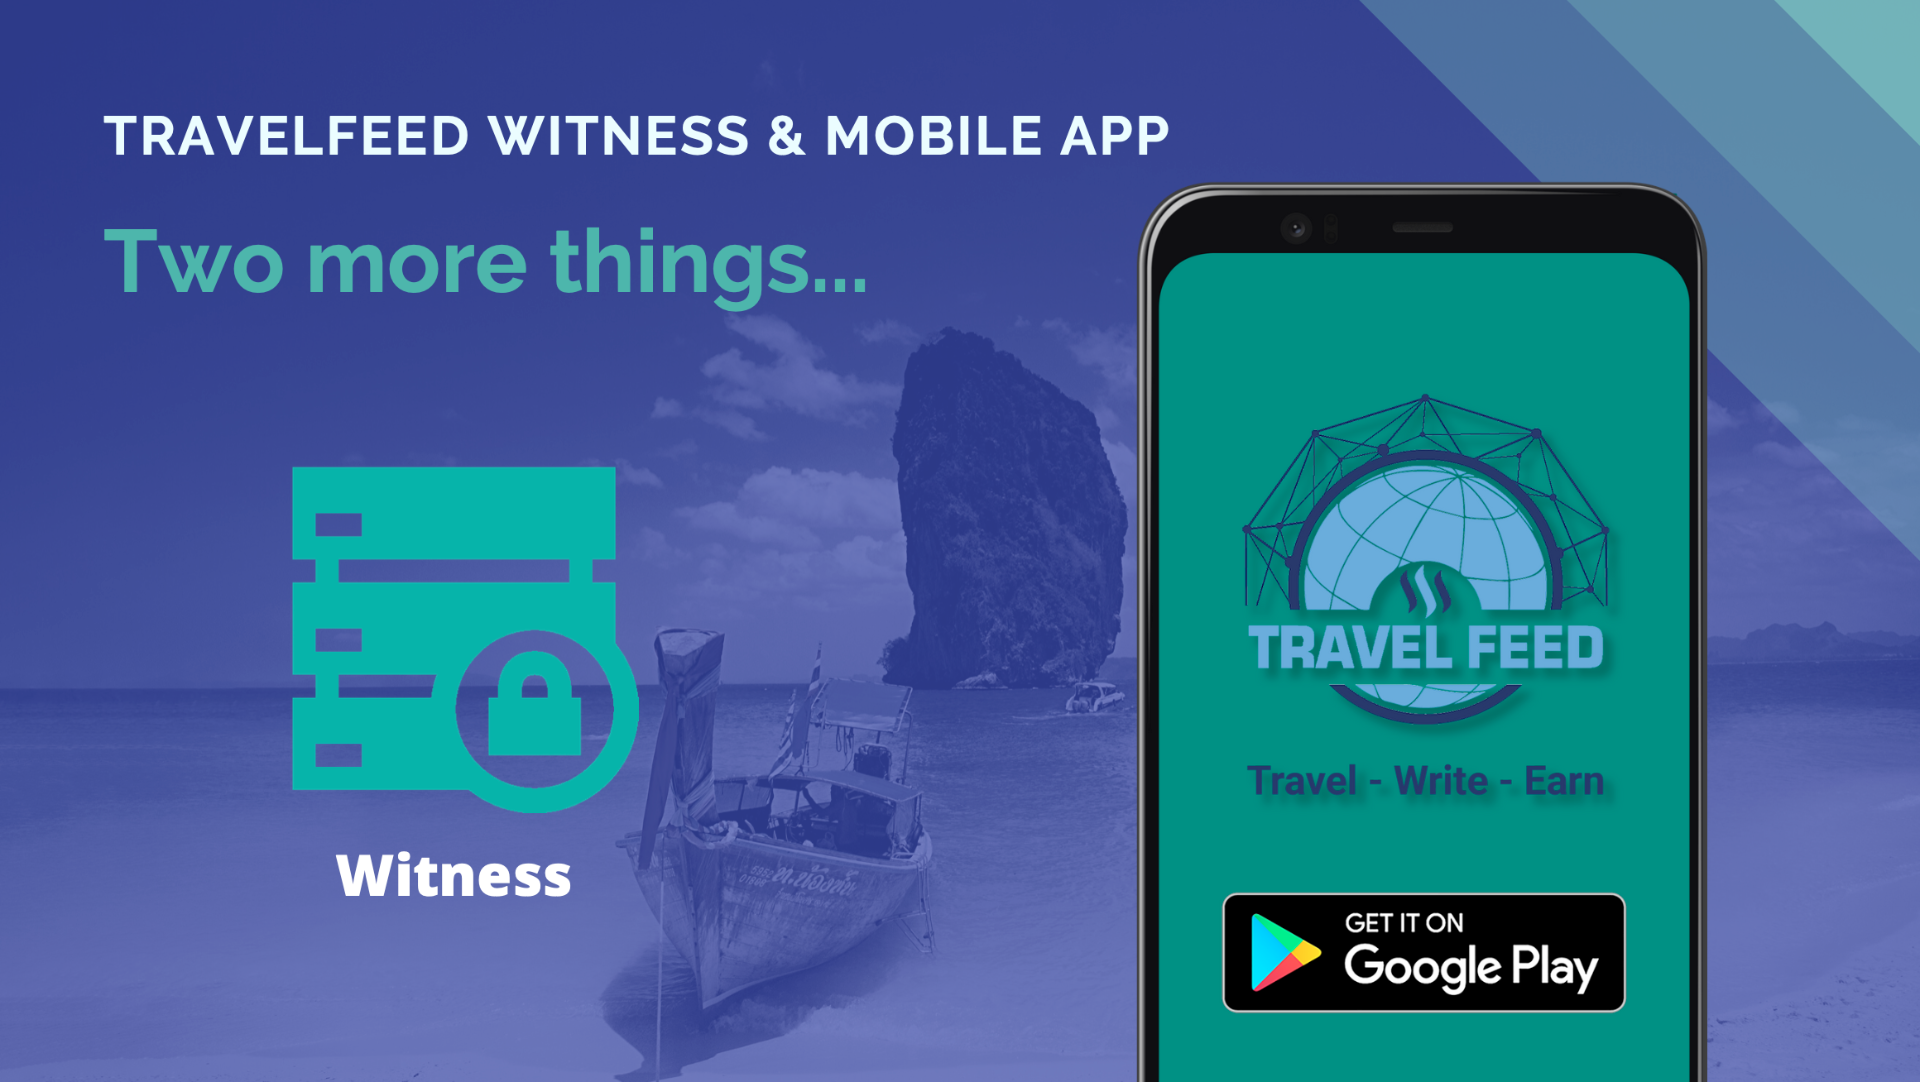 TravelFeed at SteemFest⁴: Android App - Vote for our Witness